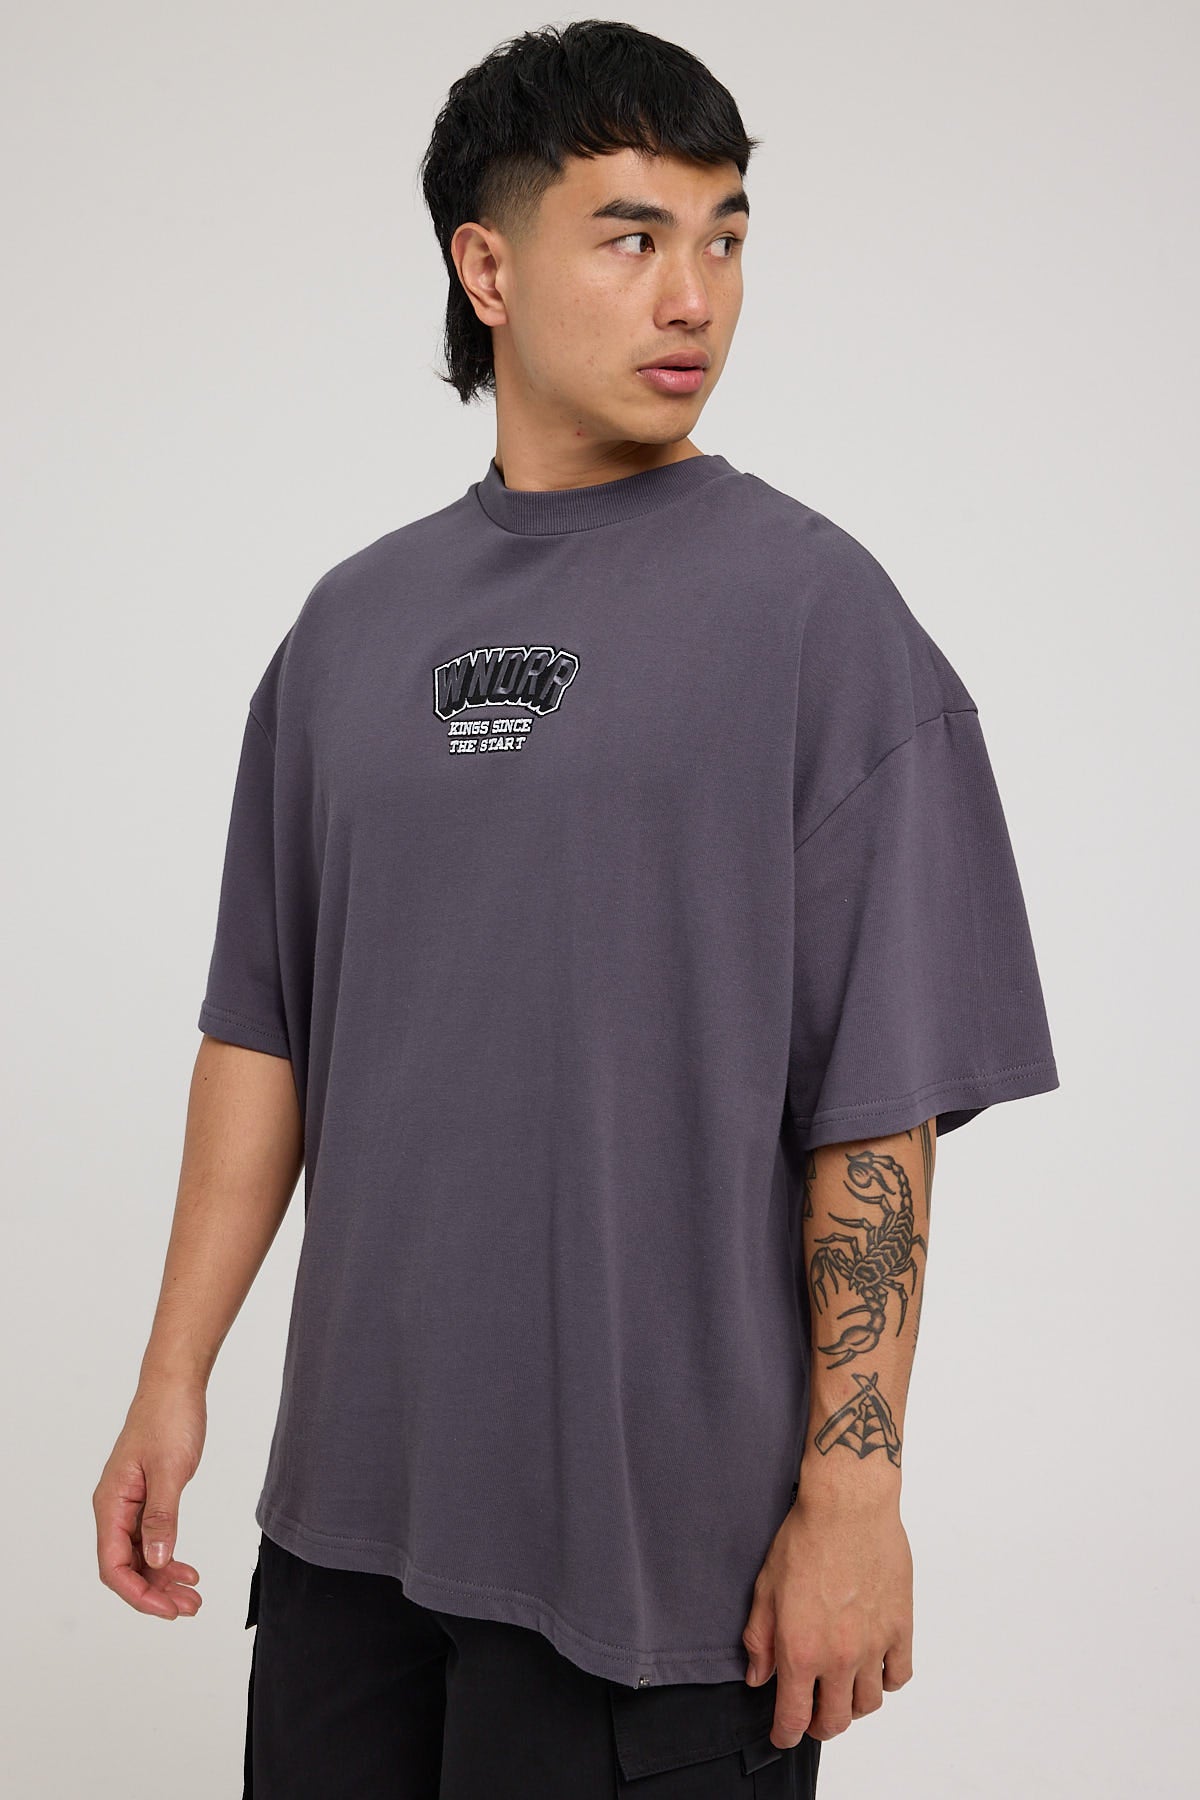 Wndrr All Rounder Heavy Weight Tee Charcoal